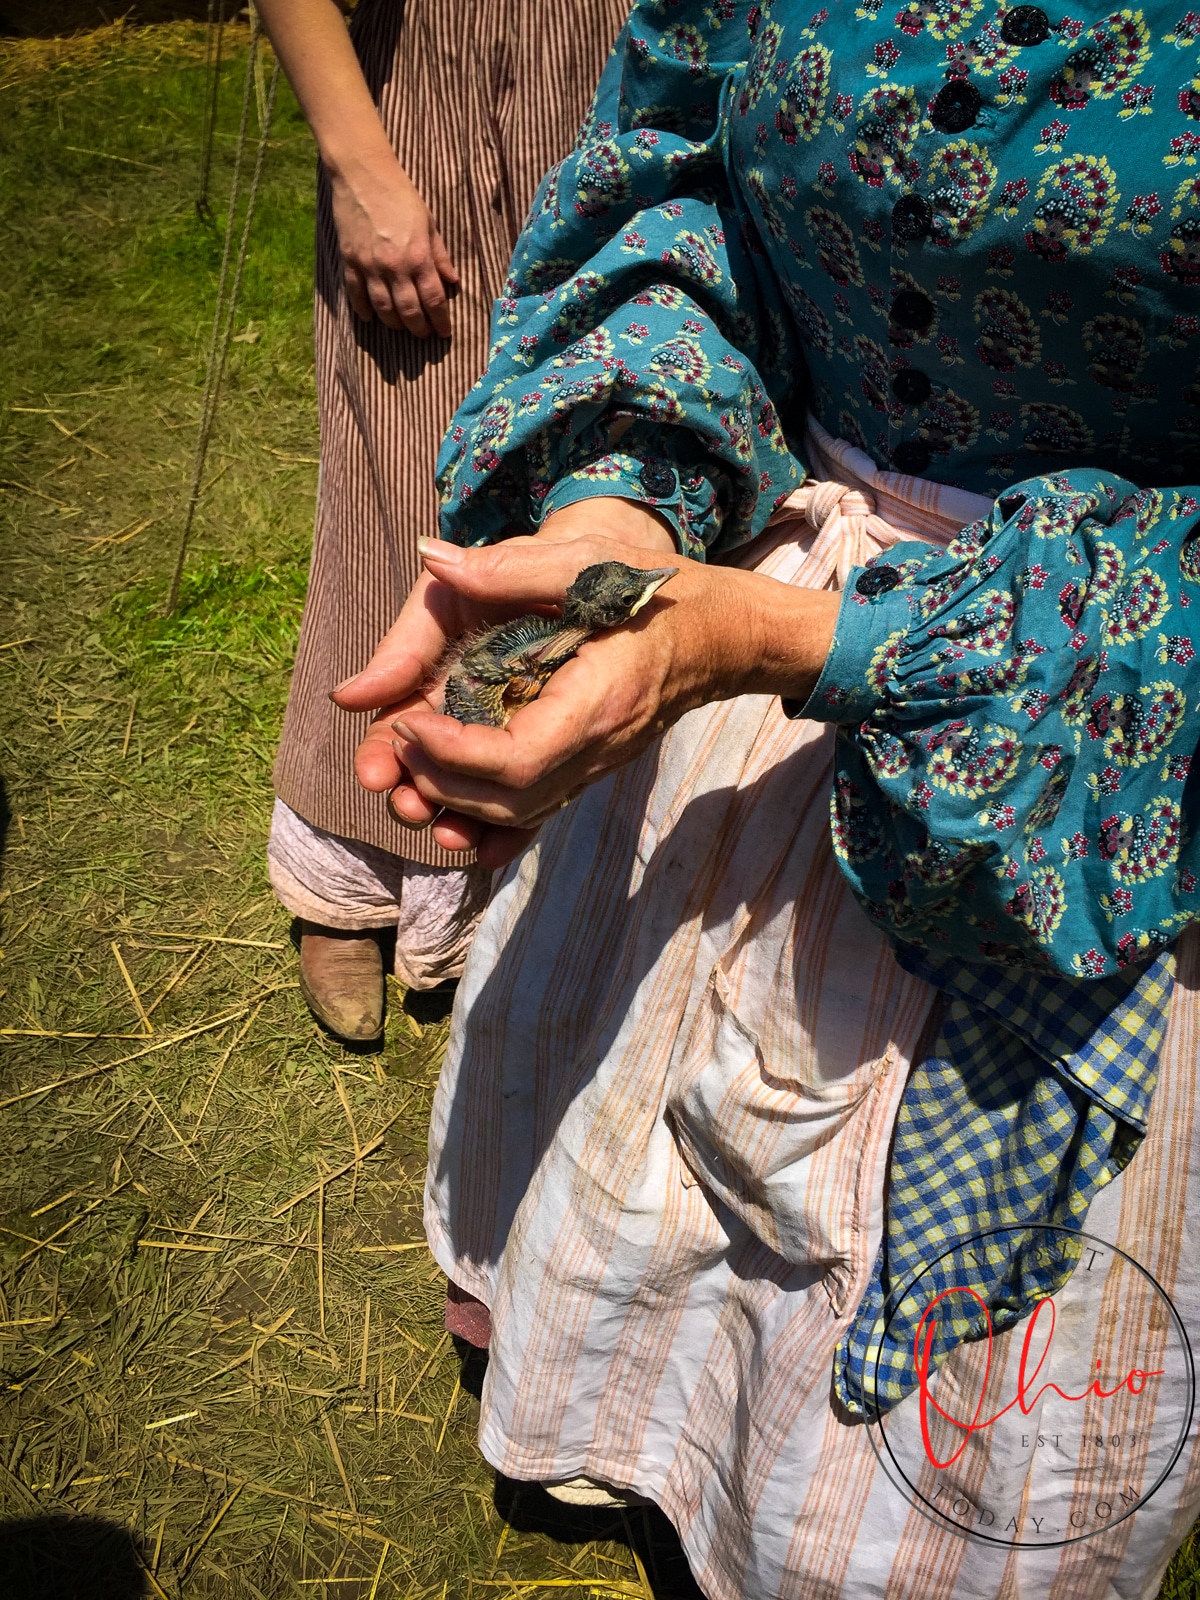 lady in period costume dress holding a very small baby duck at ohio village Photo credit: Cindy Gordon of VisitOhioToday.com